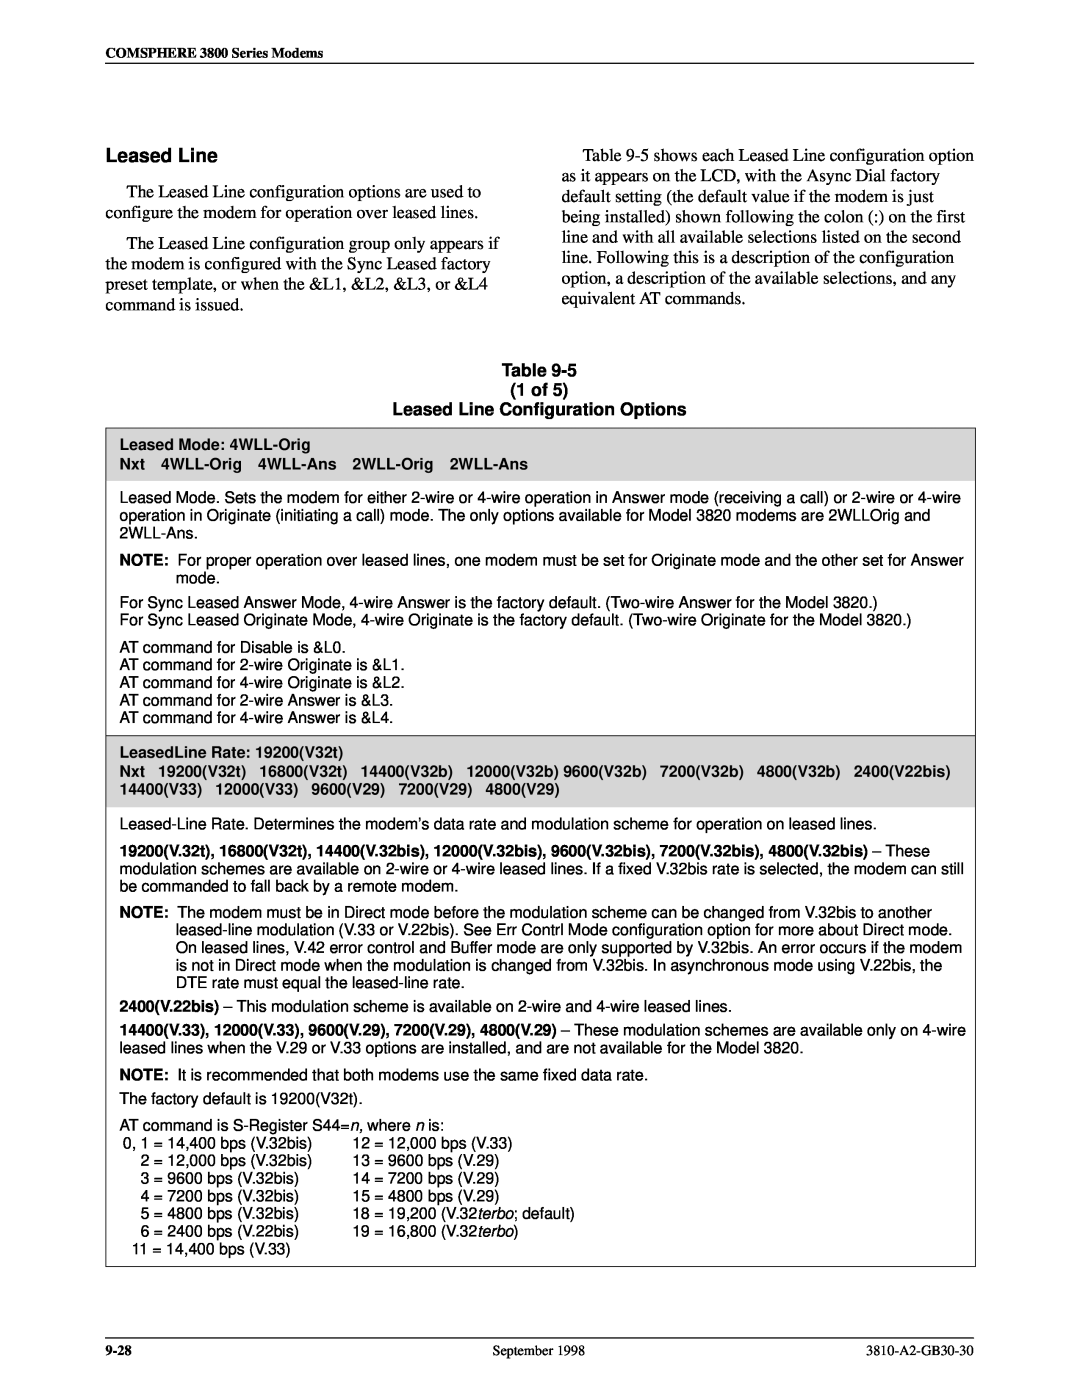 Paradyne 3800 manual of Leased Line Configuration Options 